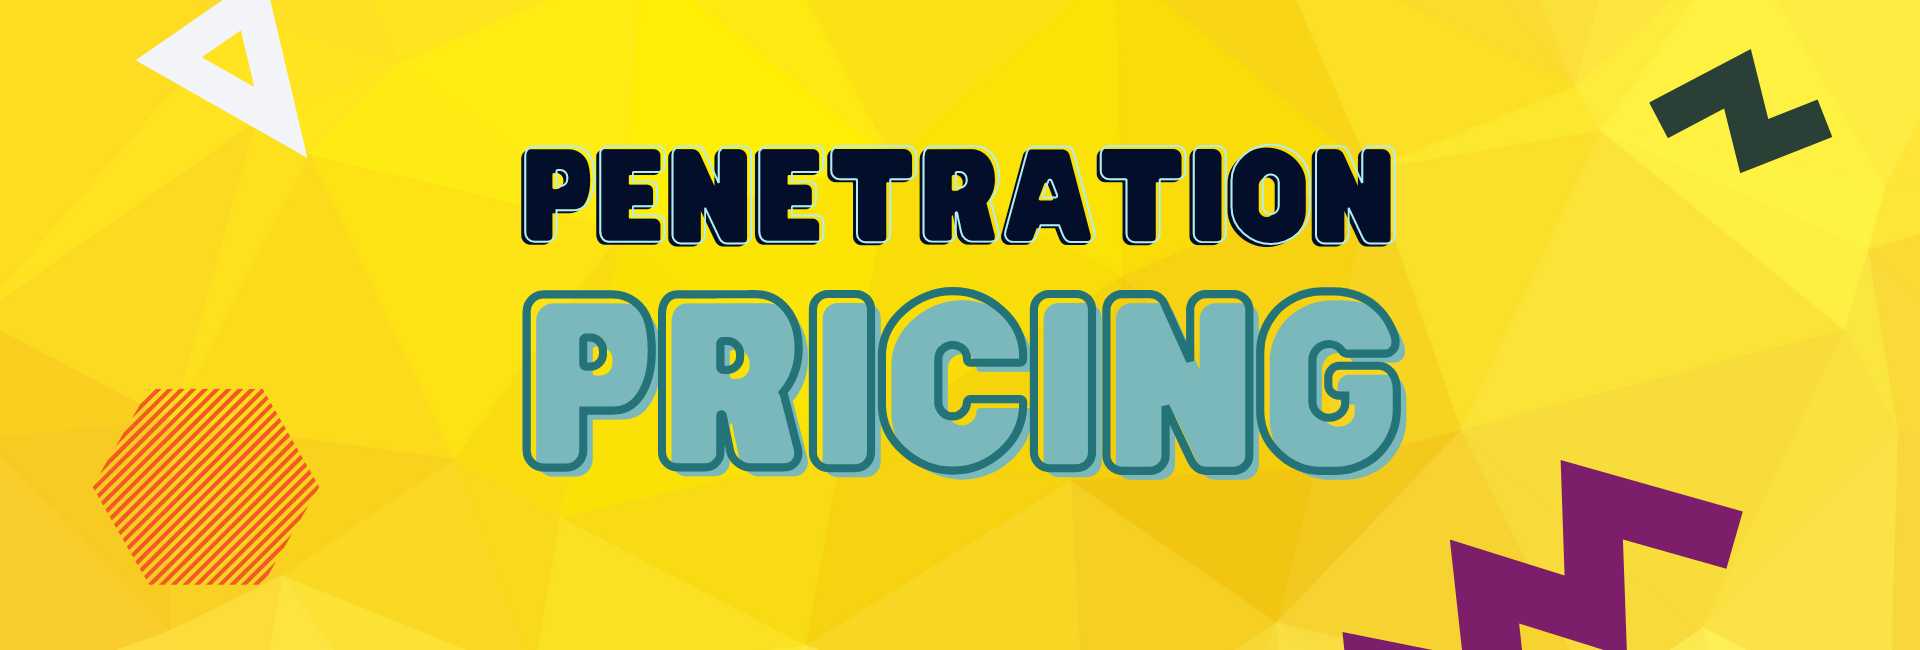 Penetration Pricing: Bringing in new customers at a risk